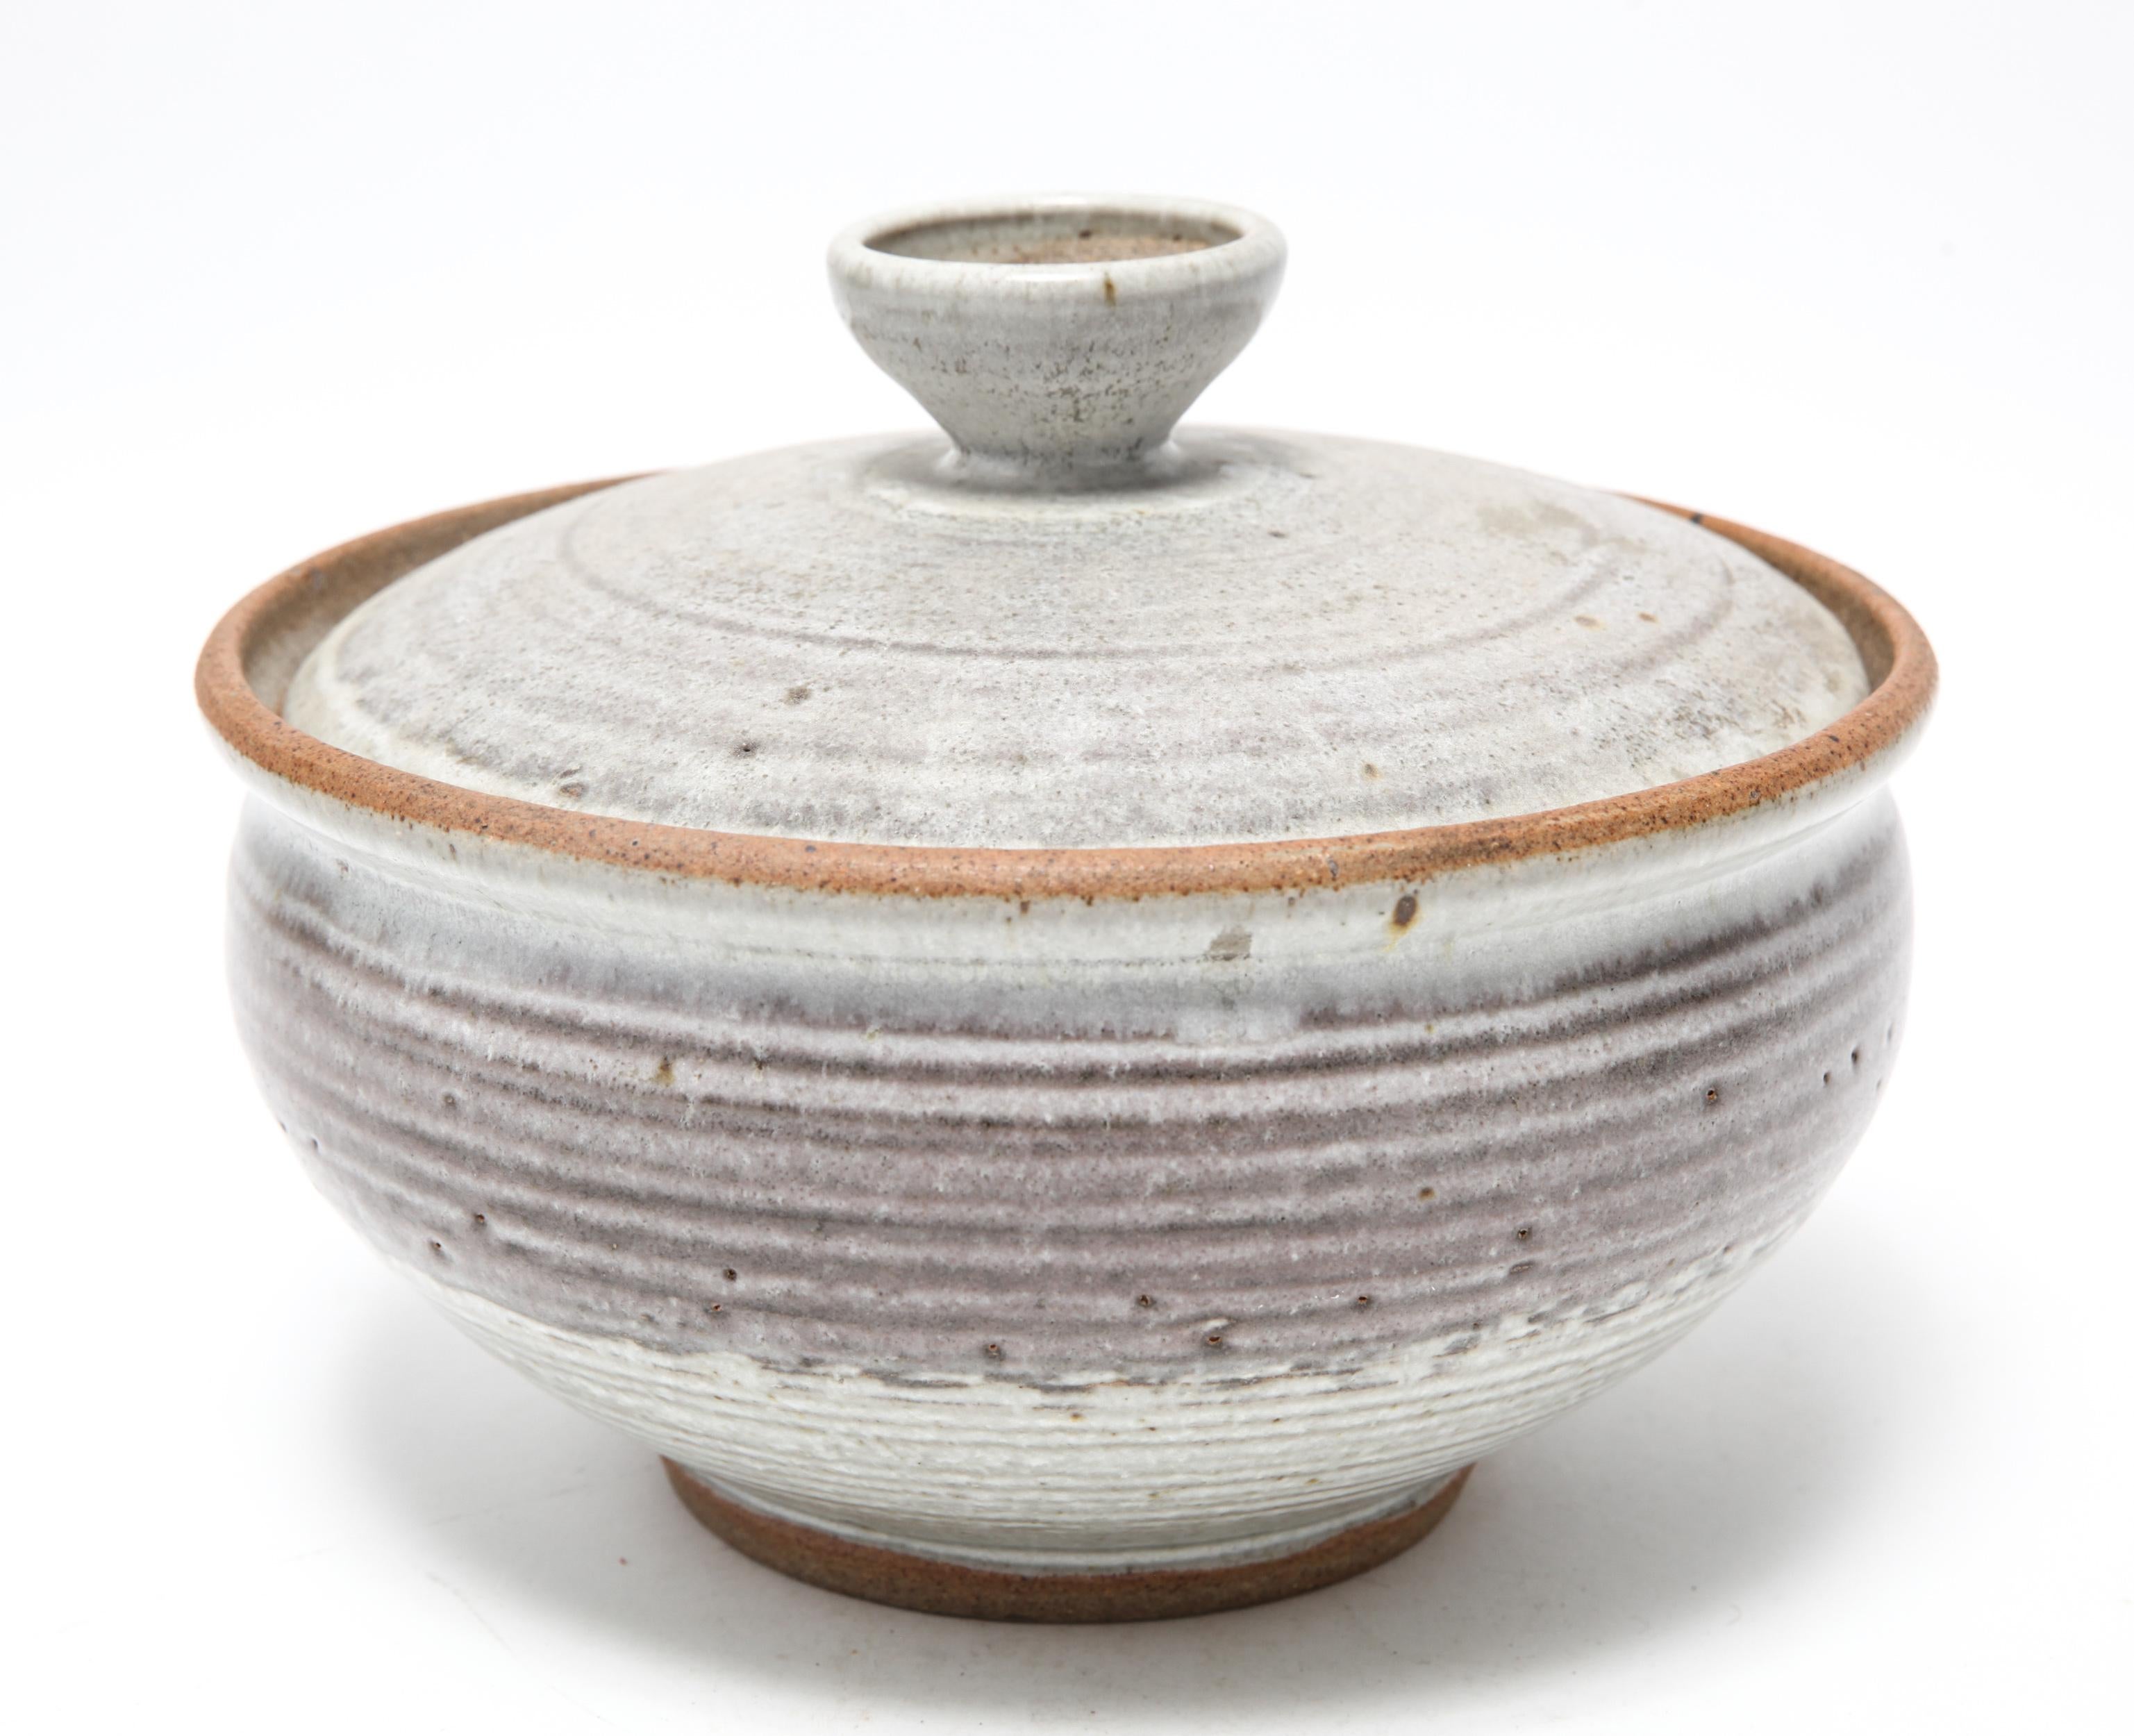 American Mid-Century Modern stoneware art pottery covered bowl designed by Karen Karnes (American, 1925-2016) with a cover with knop. The piece is signed with an impressed artist's monogram 